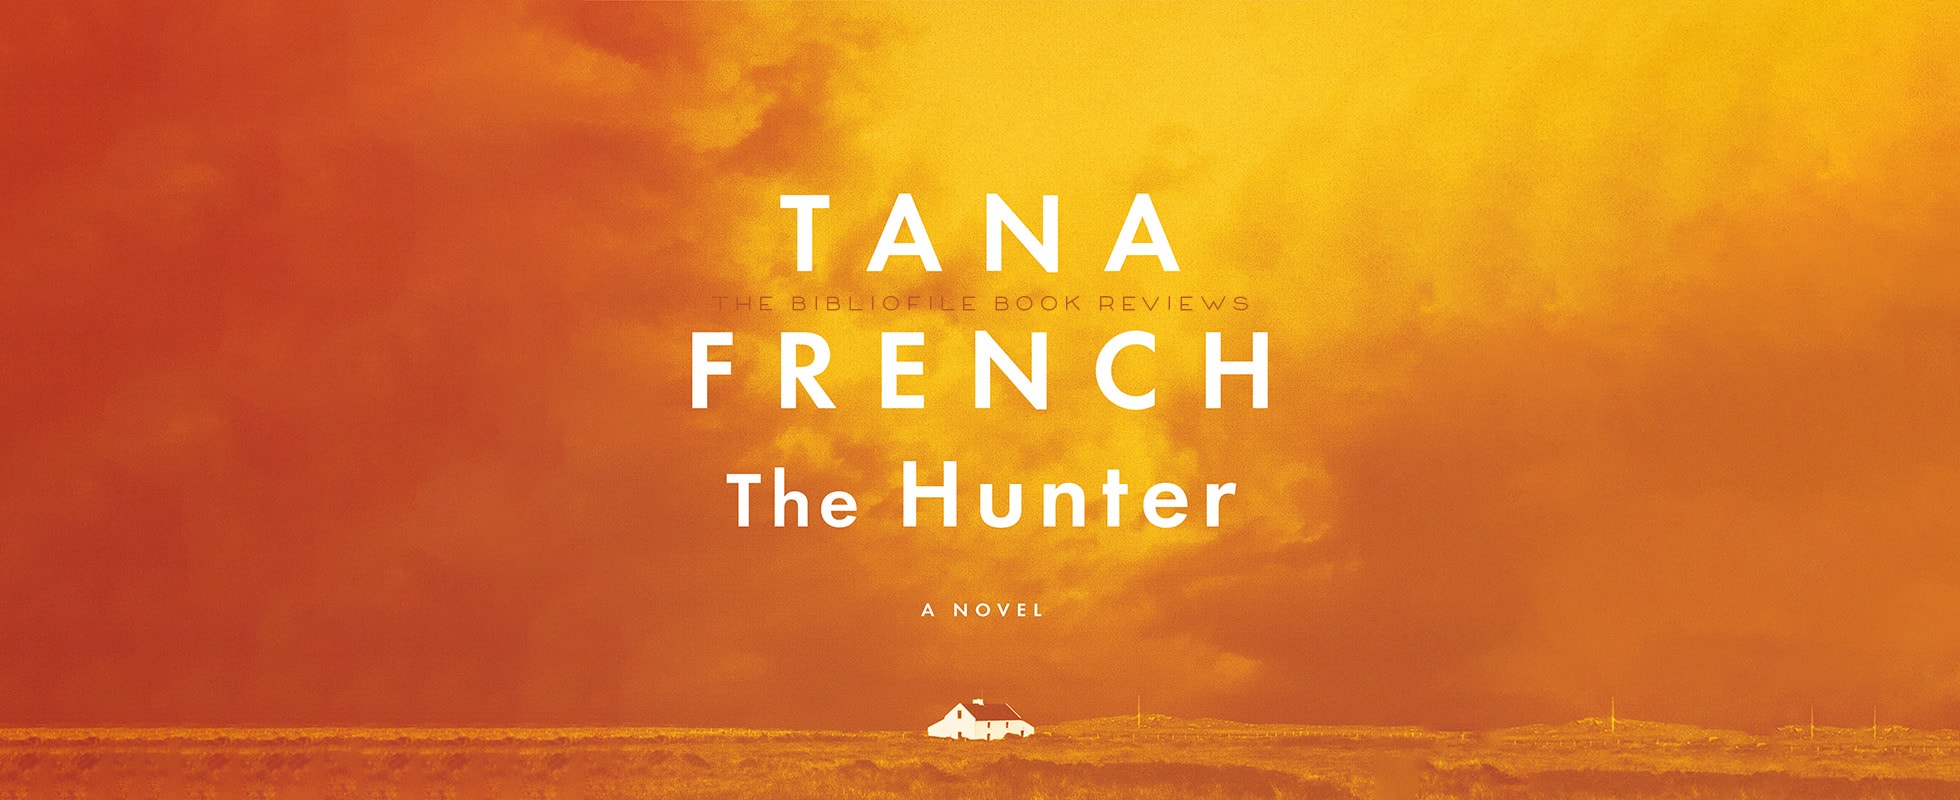 the hunter by tana french book review plot summary synopsis recap discussion ending explanation spoilers